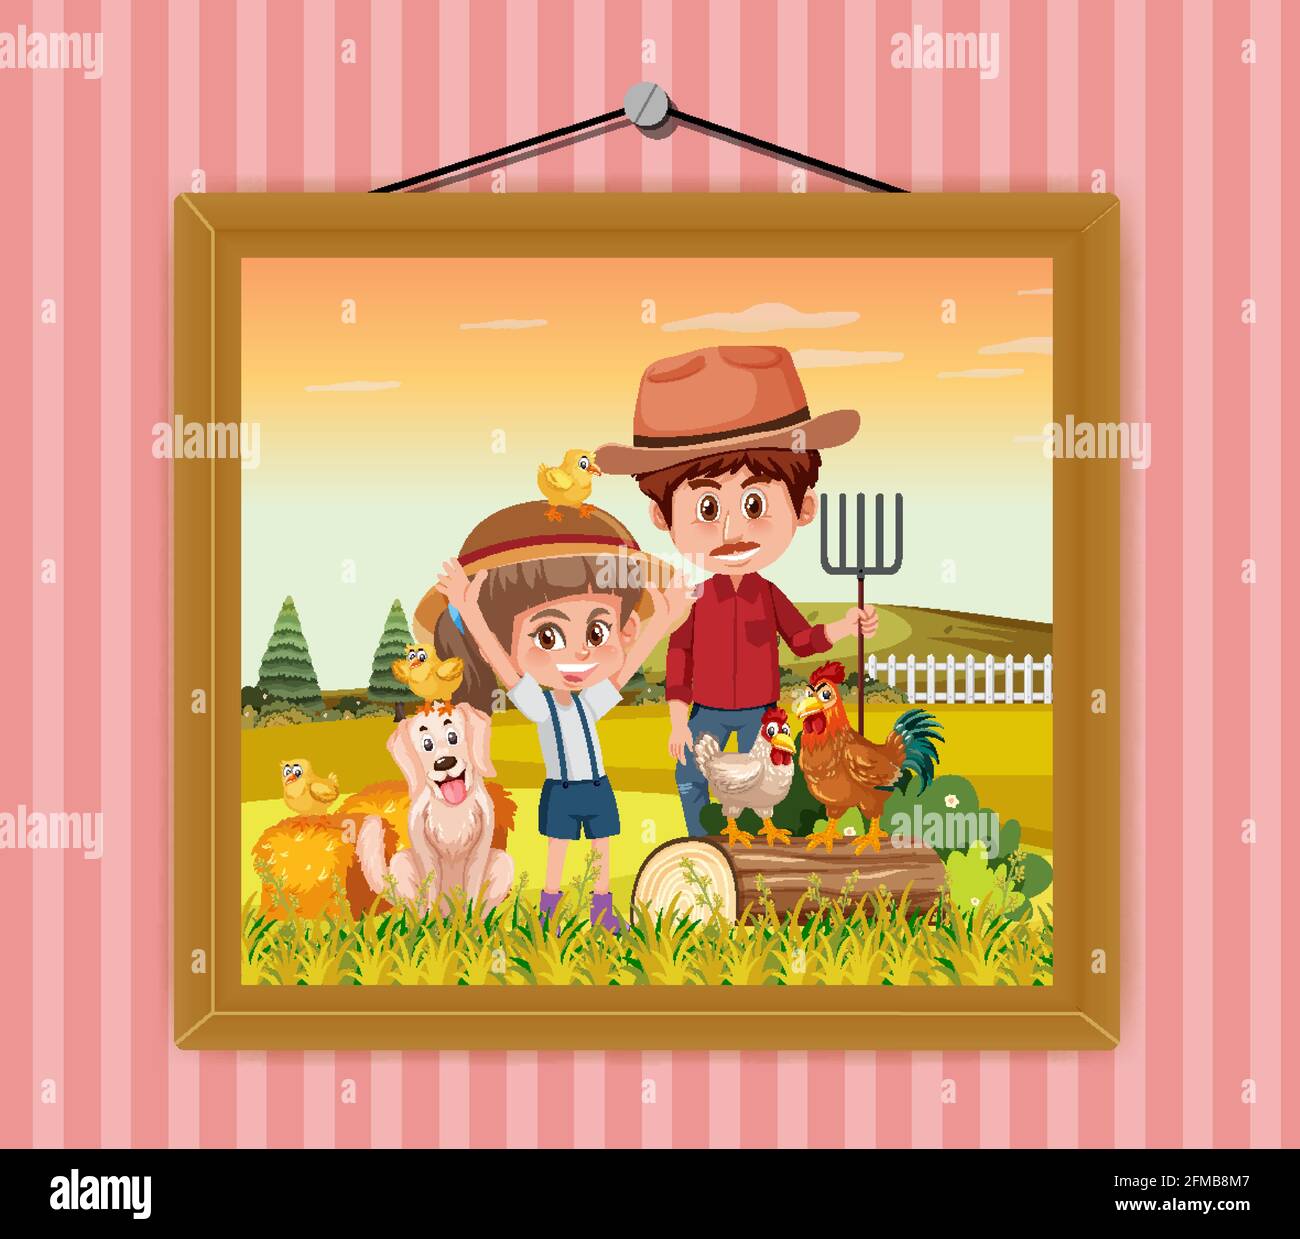 A picture of Dad and daughter in the farm scene hanging on the wall illustration Stock Vector